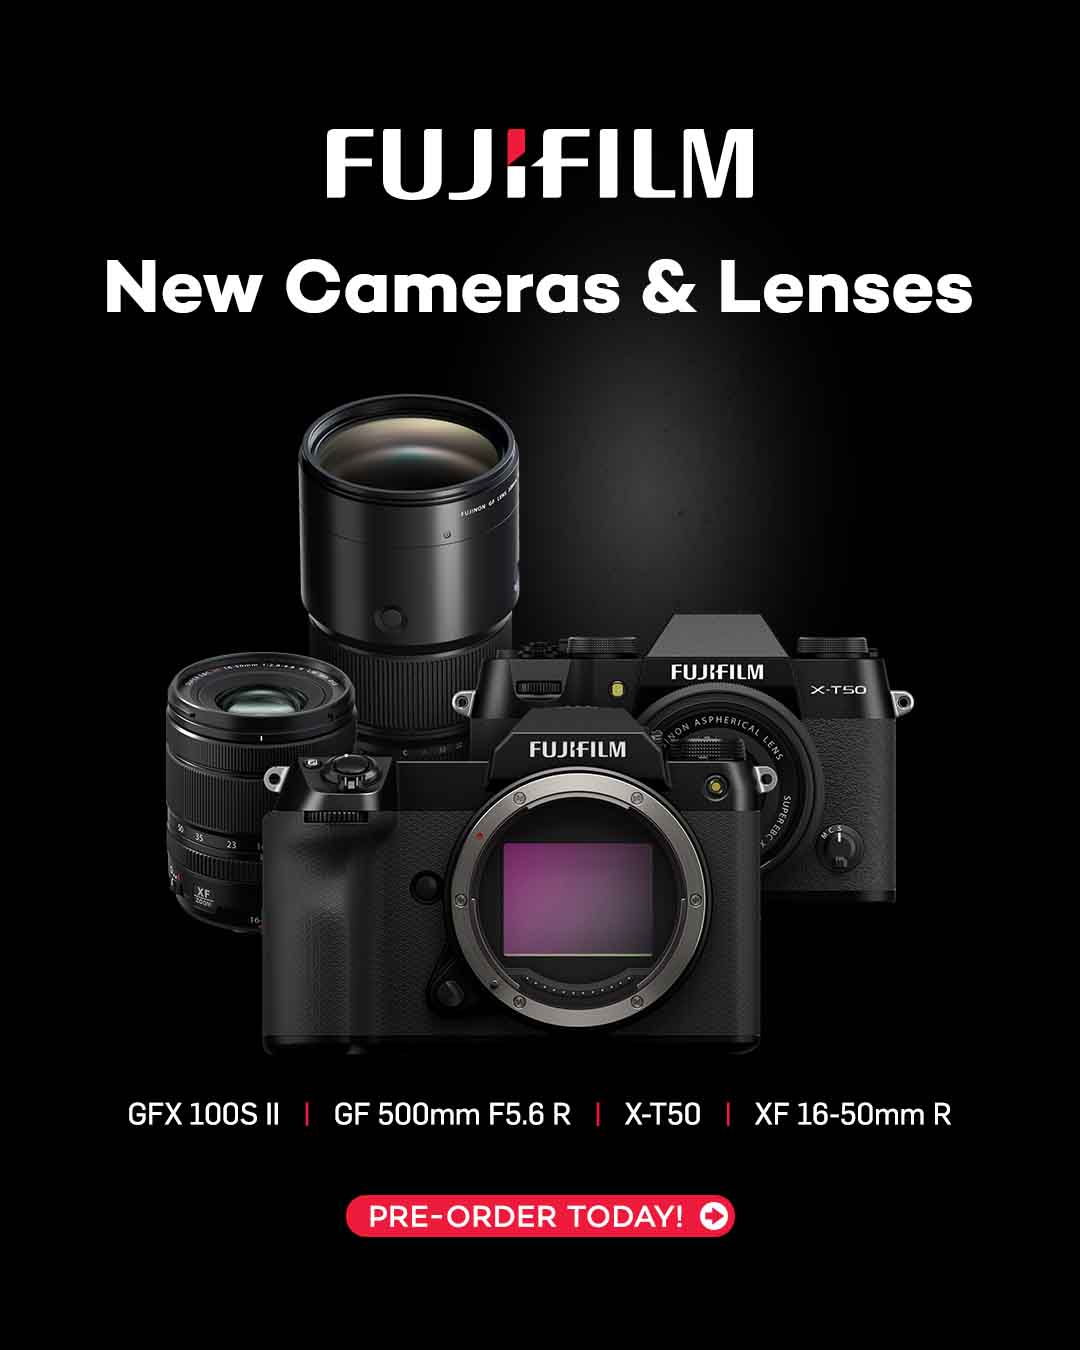 New Fujifilm Cameras and Lenses for X and GFX Systems